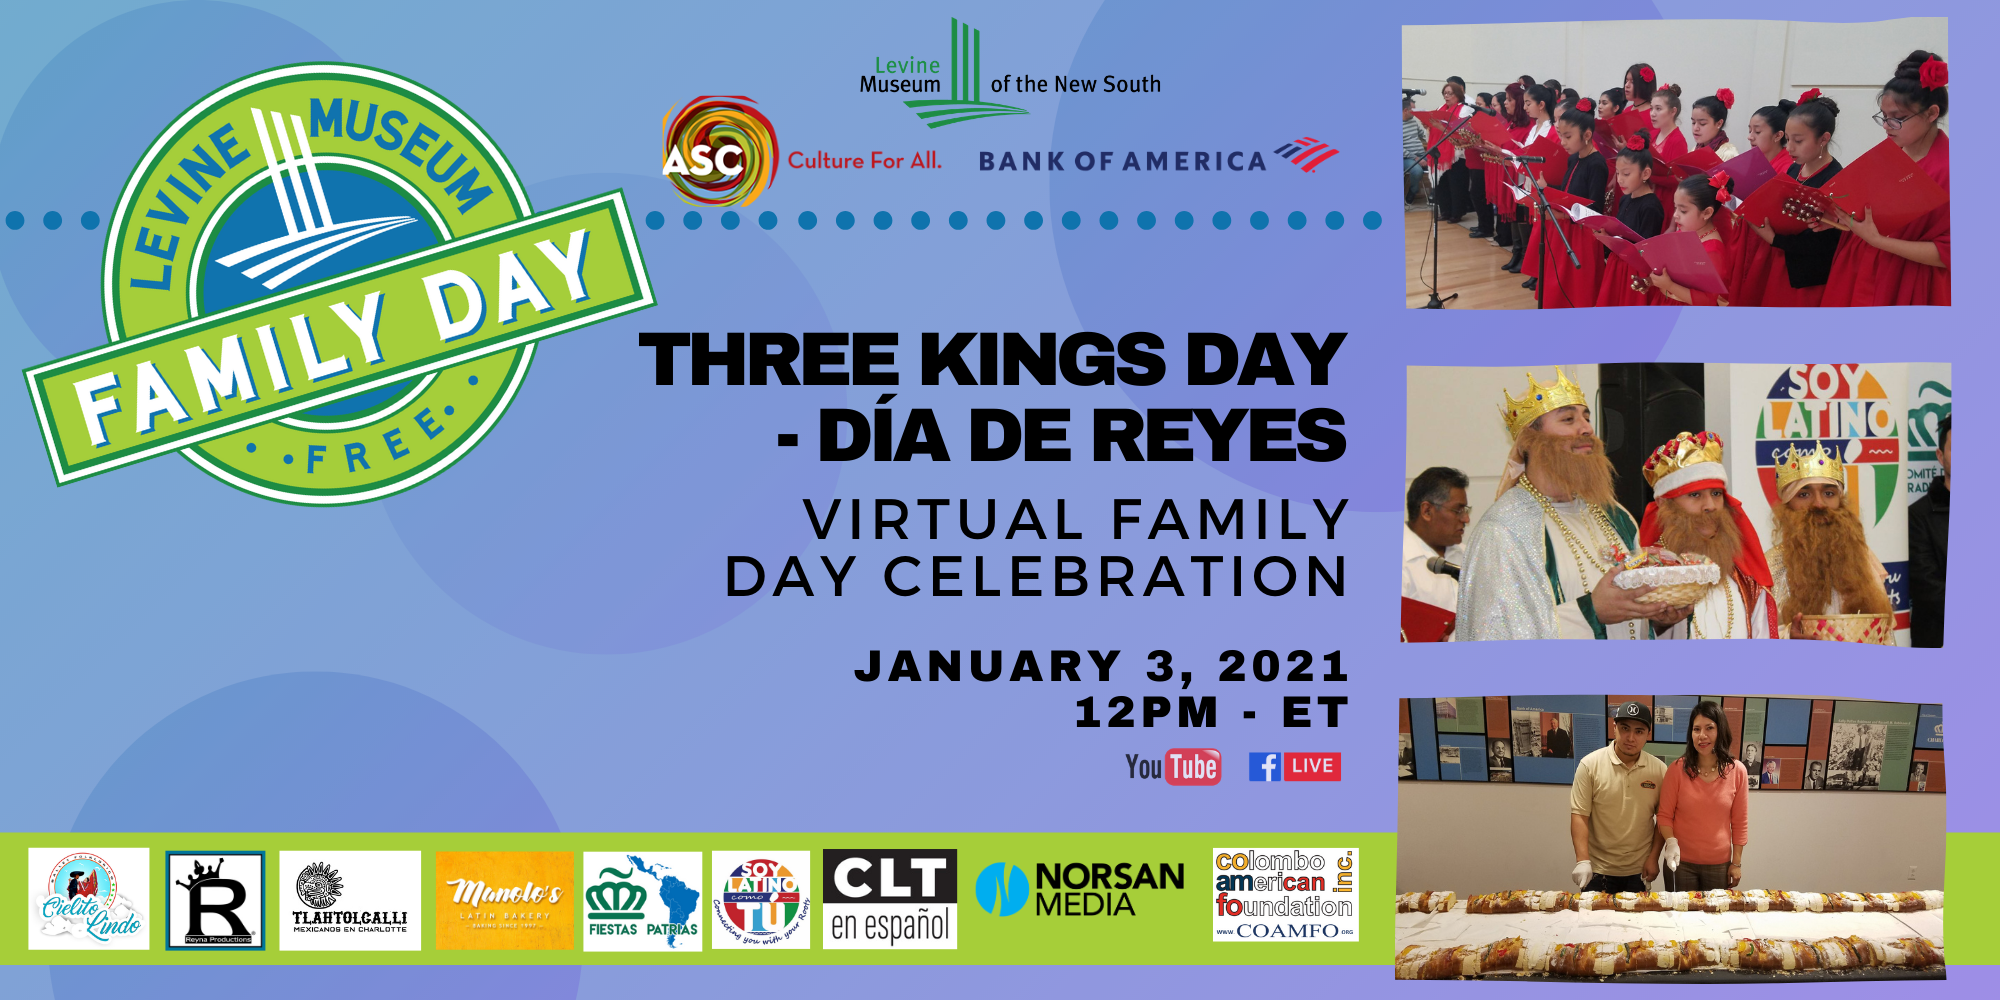 Levine Museum of the New South Three Kings Day - Die De Reyes Event Image